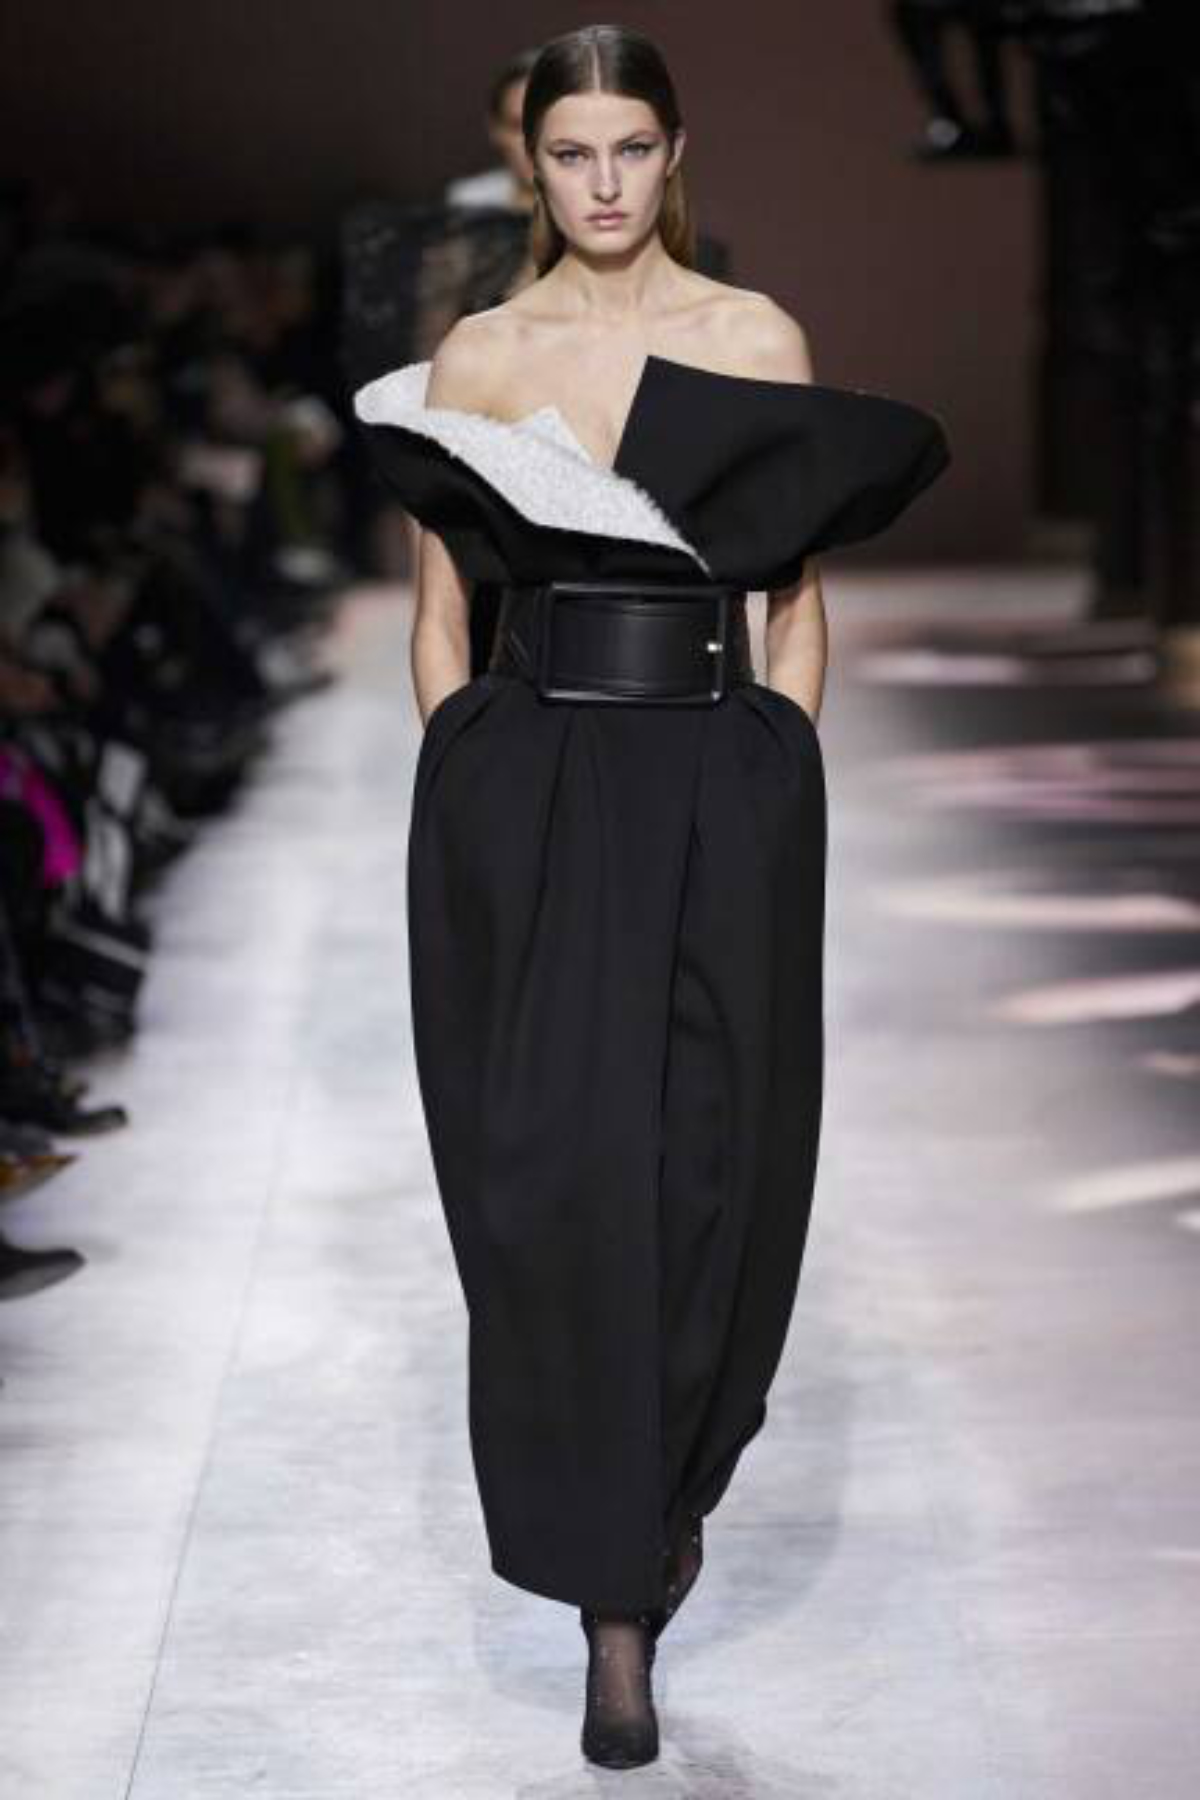 Haute couture: a “Love Letter” from Clare Waight Keller to Givenchy